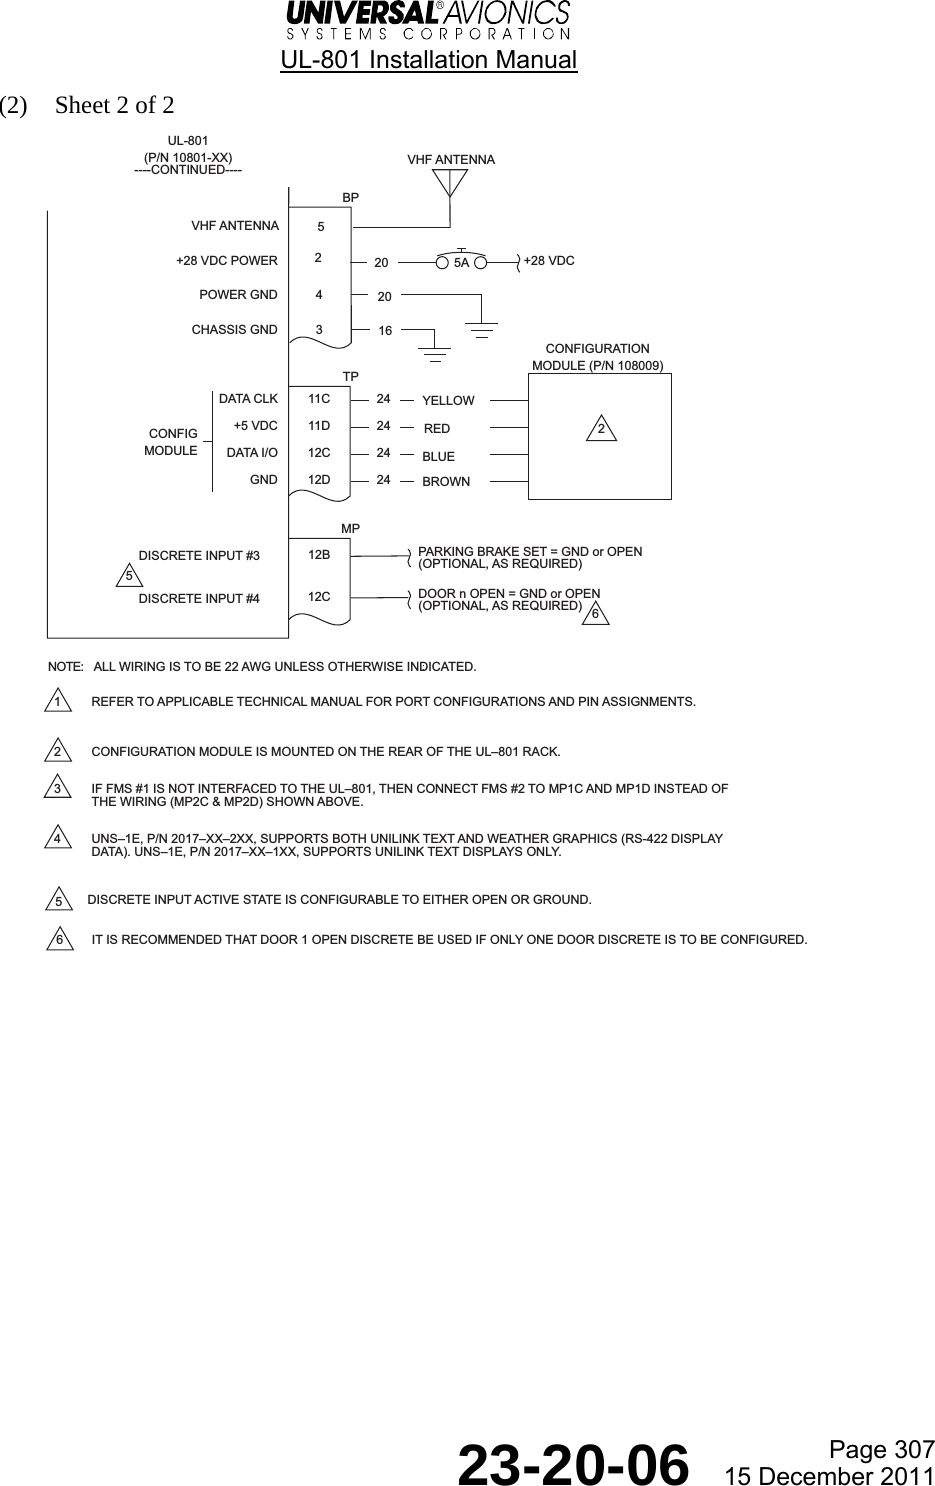  UL-801 Installation Manual  Page 307  23-20-06  15 December 2011 (2) Sheet 2 of 2   MPBP+28 VDC POWER +28 VDCPOWER GND 4CHASSIS GND 3TPDATA CLK 11CCONFIGURATIONMODULE (P/N 108009)24+5 VDC 11D 24DATA I/O 12C 24GND 12D 24CONFIGMODULEDISCRETE INPUT #3 12B PARKING BRAKE SET = GND or OPEN(OPTIONAL, AS REQUIRED)DISCRETE INPUT #4 12C DOOR n OPEN = GND or OPEN(OPTIONAL, AS REQUIRED)2YELLOWREDBLUEBROWN20165A2202056UL-801(P/N 10801-XX)----CONTINUED----1 REFER TO APPLICABLE TECHNICAL MANUAL FOR PORT CONFIGURATIONS AND PIN ASSIGNMENTS.2 CONFIGURATION MODULE IS MOUNTED ON THE REAR OF THE UL801 RACK.3 IF FMS #1 IS NOT INTERFACED TO THE UL801, THEN CONNECT FMS #2 TO MP1C AND MP1D INSTEAD OFTHE WIRING (MP2C &amp; MP2D) SHOWN ABOVE.4 UNS1E, P/N 2017XX2XX, SUPPORTS BOTH UNILINK TEXT AND WEATHER GRAPHICS (RS-422 DISPLAYDATA). UNS1E, P/N 2017XX1XX, SUPPORTS UNILINK TEXT DISPLAYS ONLY.DISCRETE INPUT ACTIVE STATE IS CONFIGURABLE TO EITHER OPEN OR GROUND.IT IS RECOMMENDED THAT DOOR 1 OPEN DISCRETE BE USED IF ONLY ONE DOOR DISCRETE IS TO BE CONFIGURED.56ALL WIRING IS TO BE 22 AWG UNLESS OTHERWISE INDICATED.NOTE:VHF ANTENNA5VHF ANTENNA